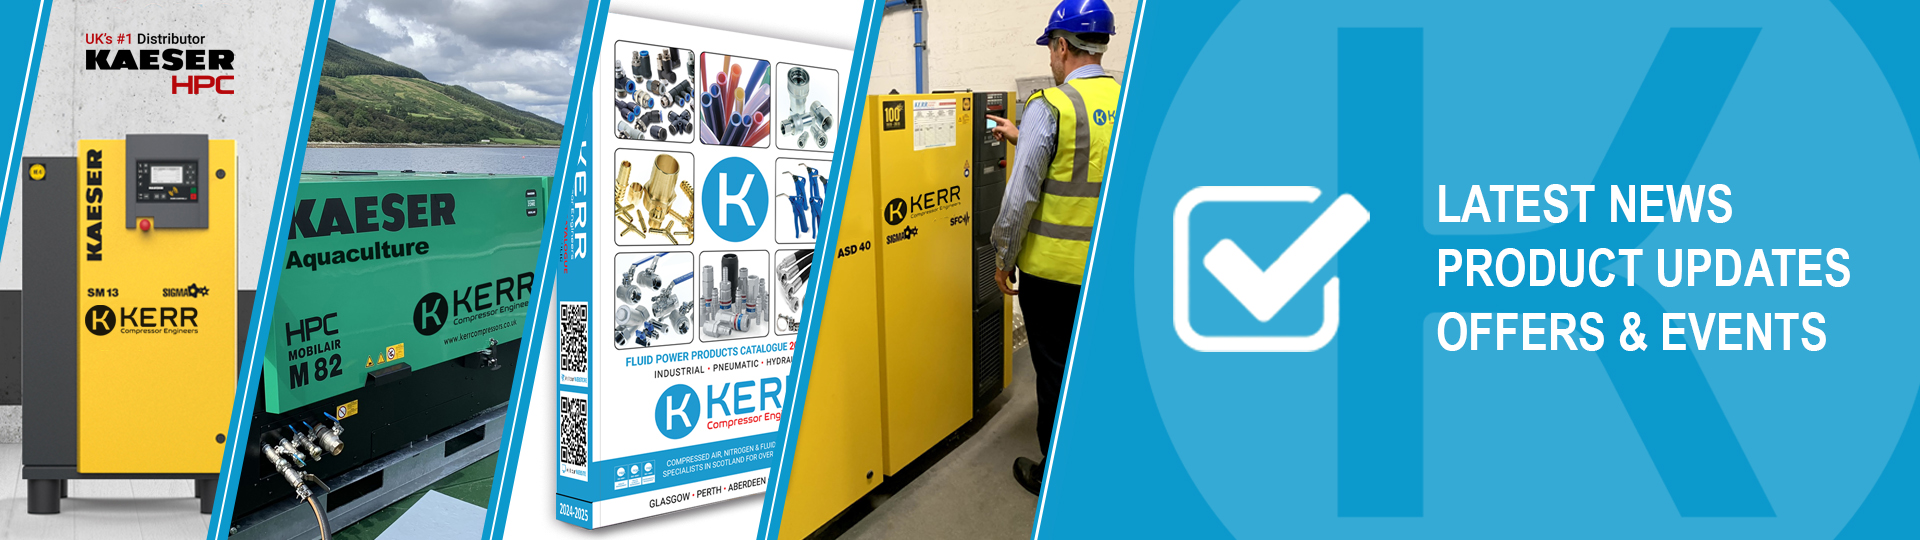 Latest News, Product Updates, Offers & Events from Kerr Compressors